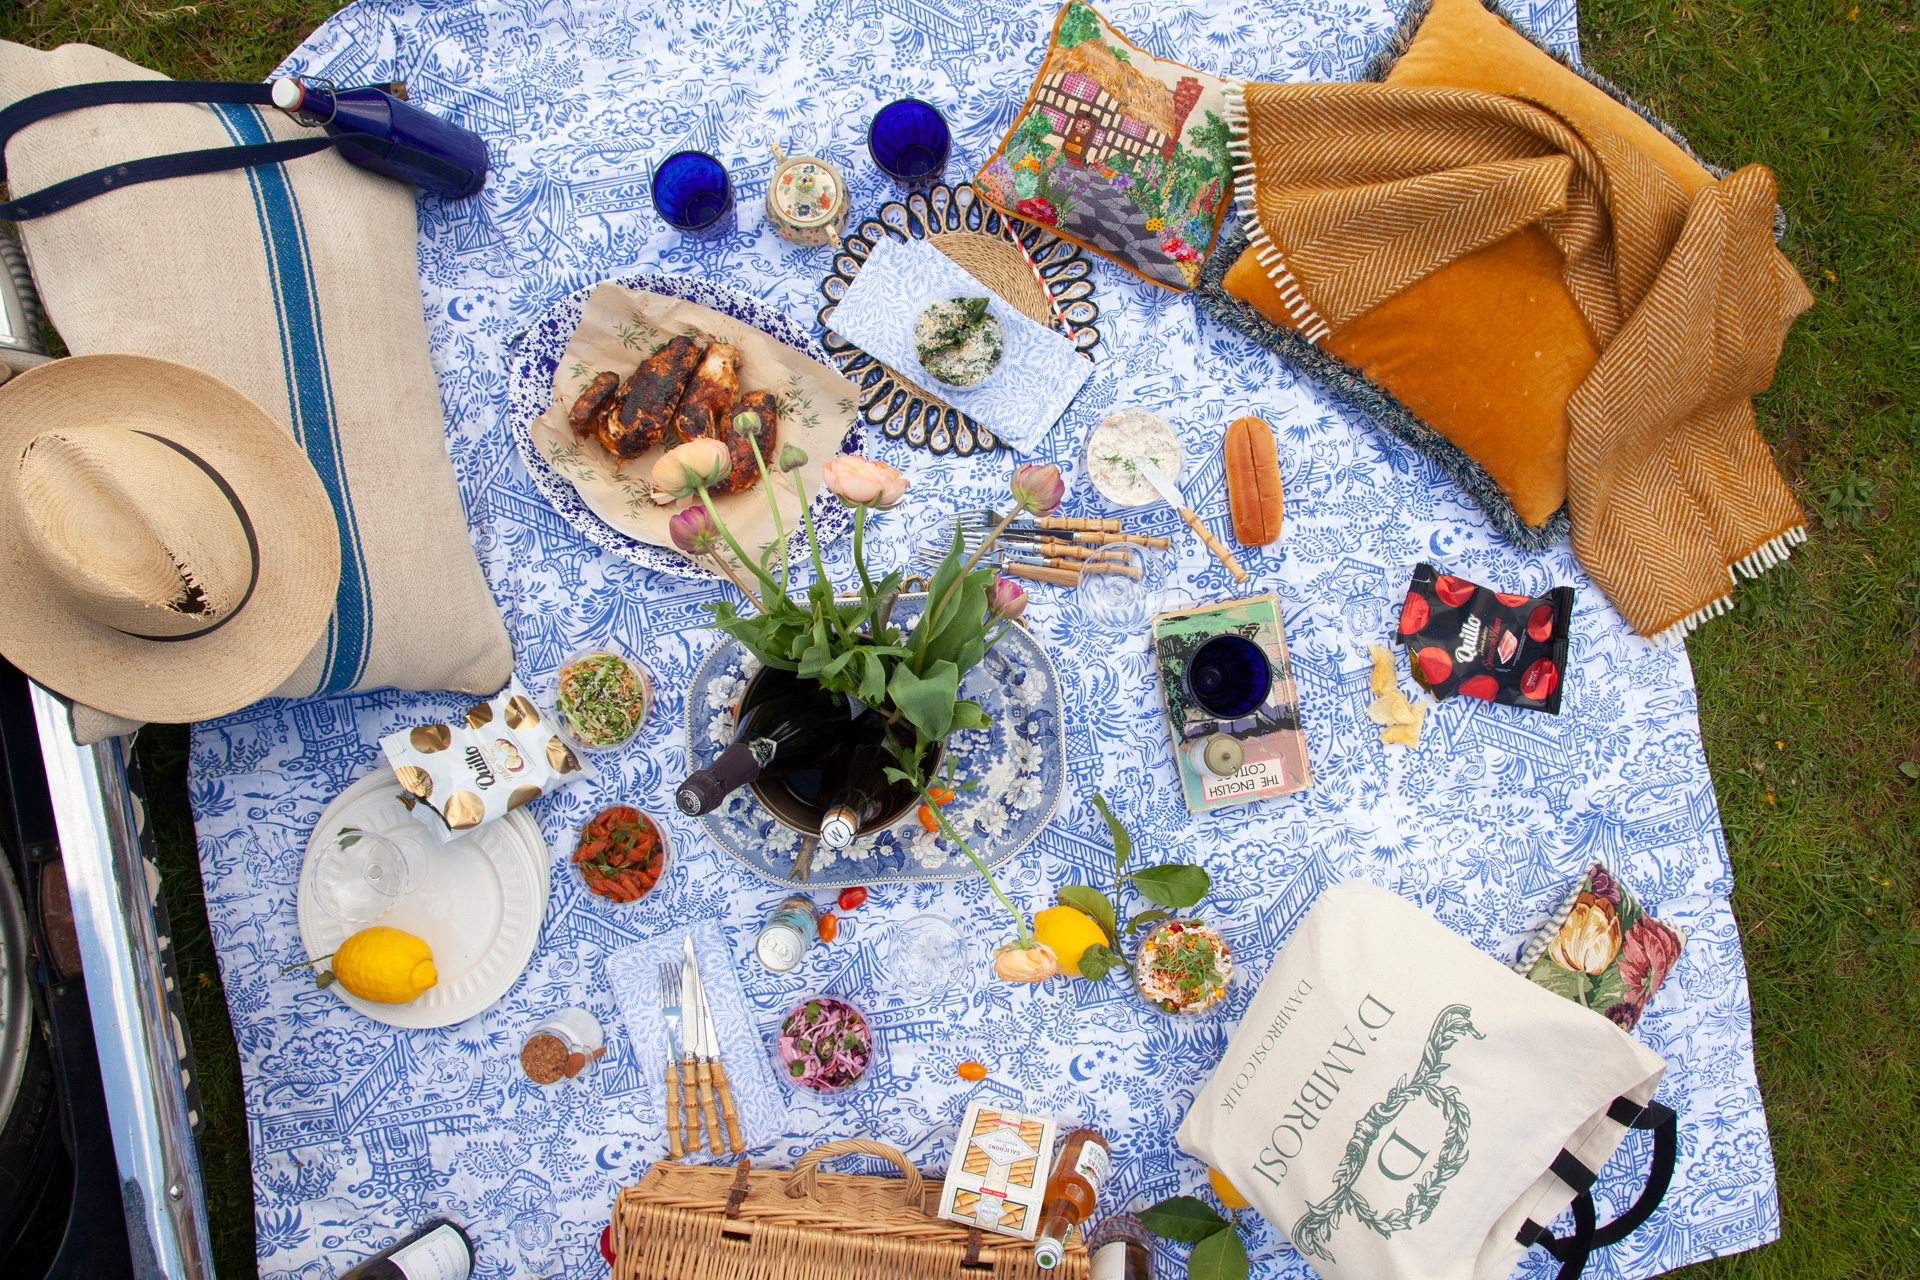 The Best Luxury Picnic Hampers in London